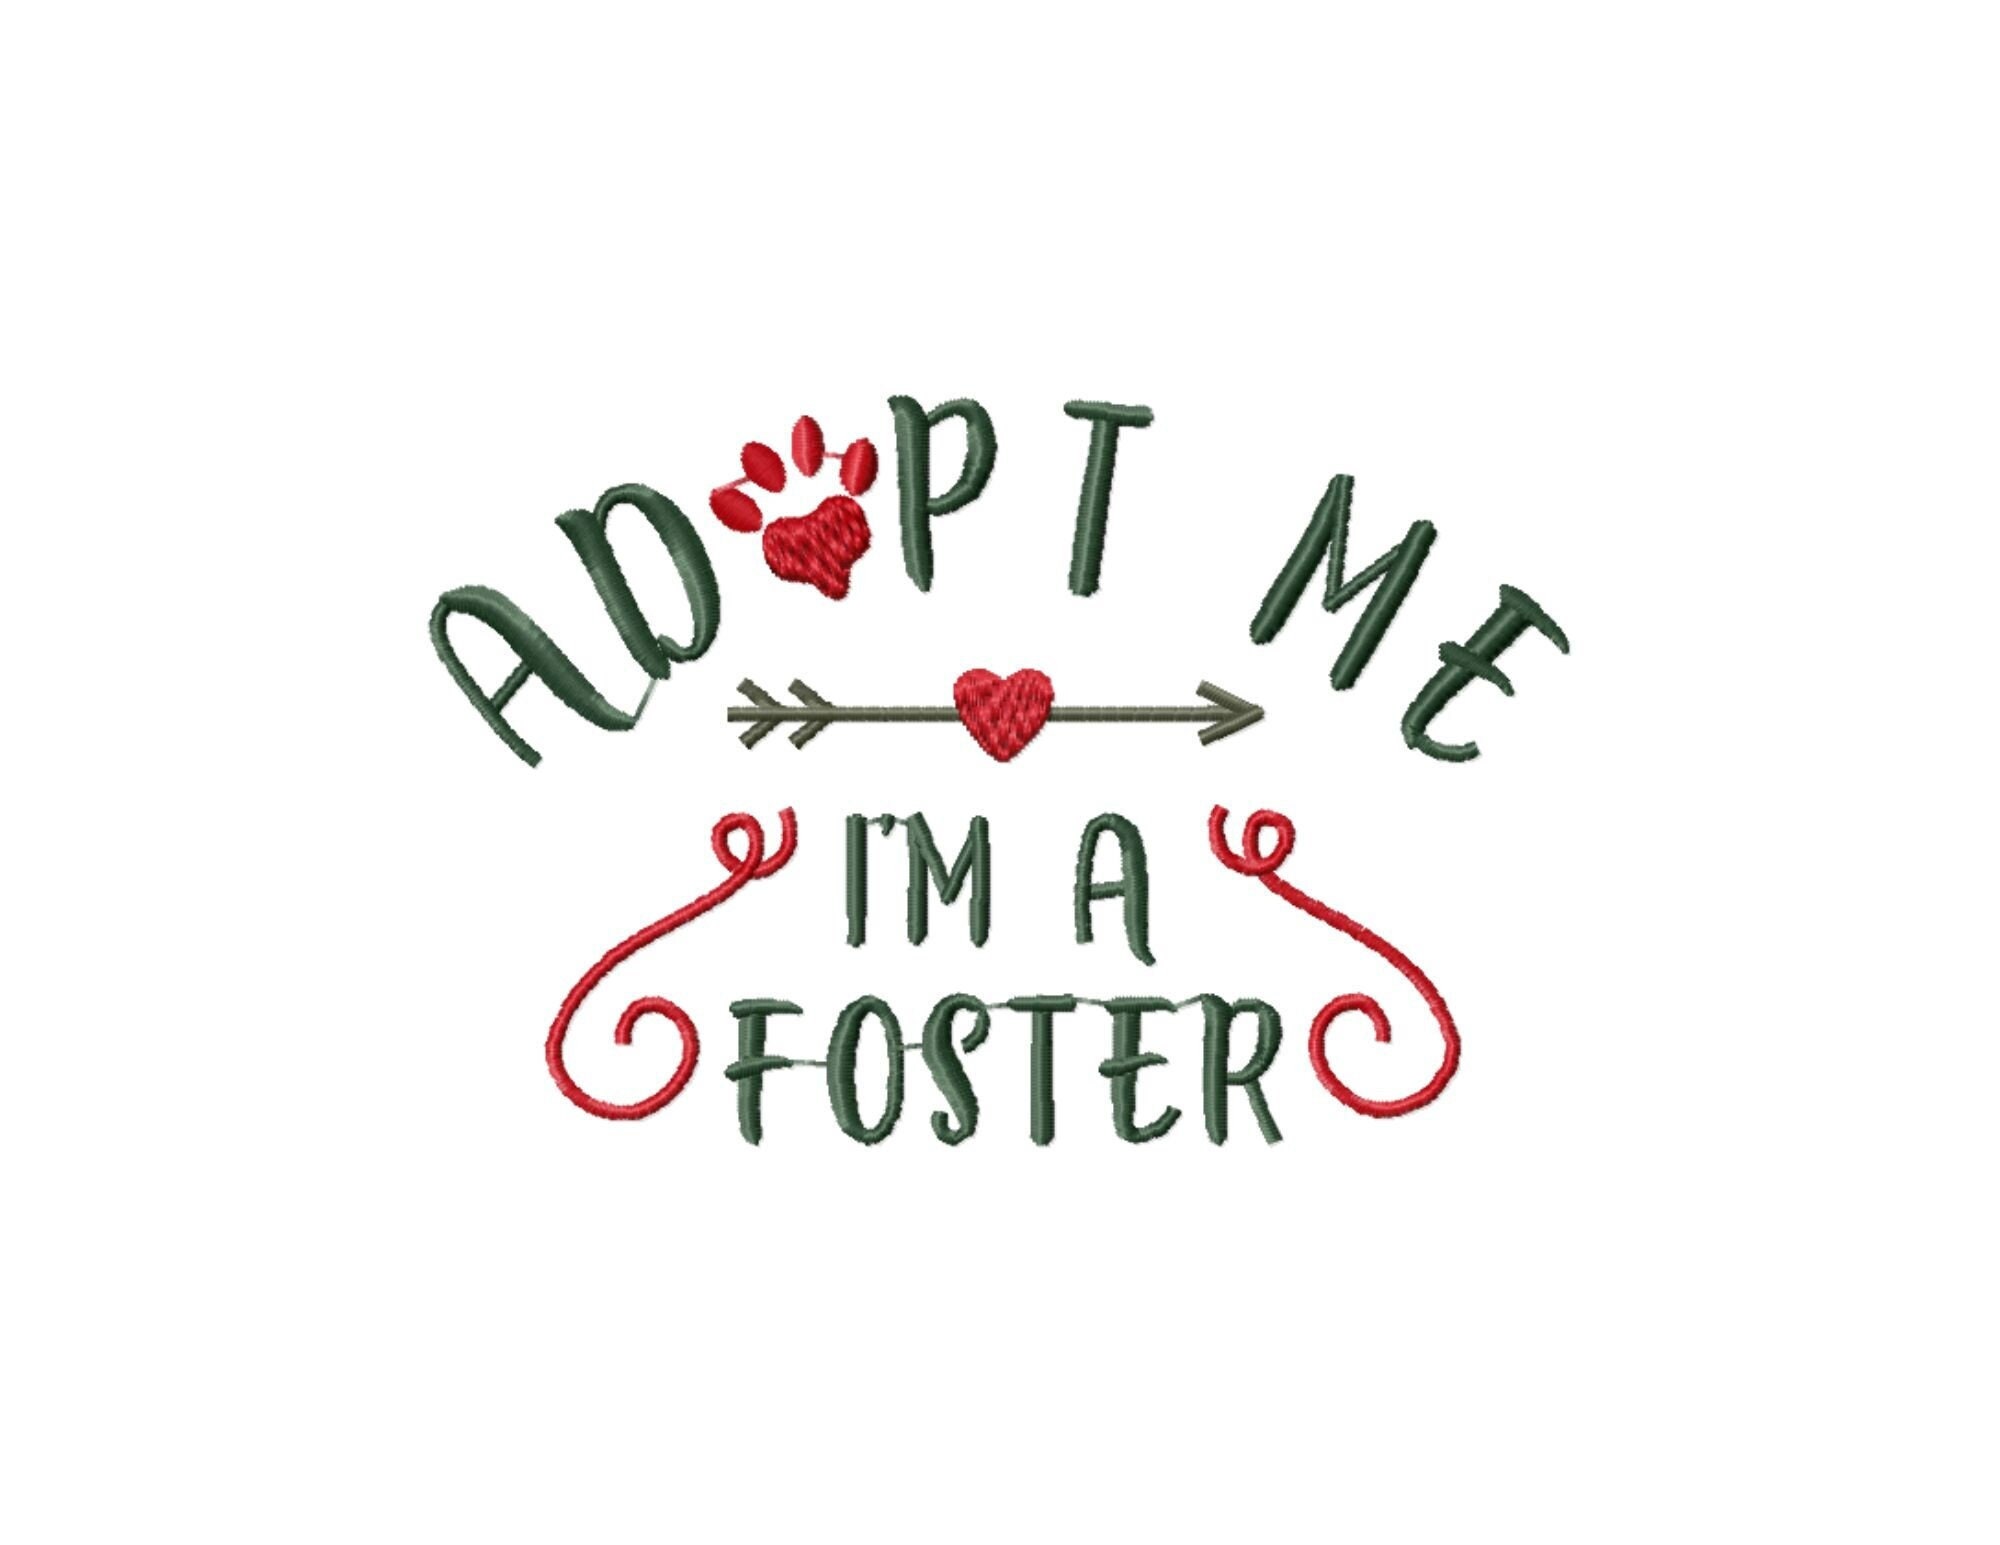  Dogline Adopt Me Vest Patches – Removable Adopt Me Patch 2-Pack  with Reflective Printed Letters for Support Dog Vest Harness Collar or  Leash Small/Medium : Pet Supplies